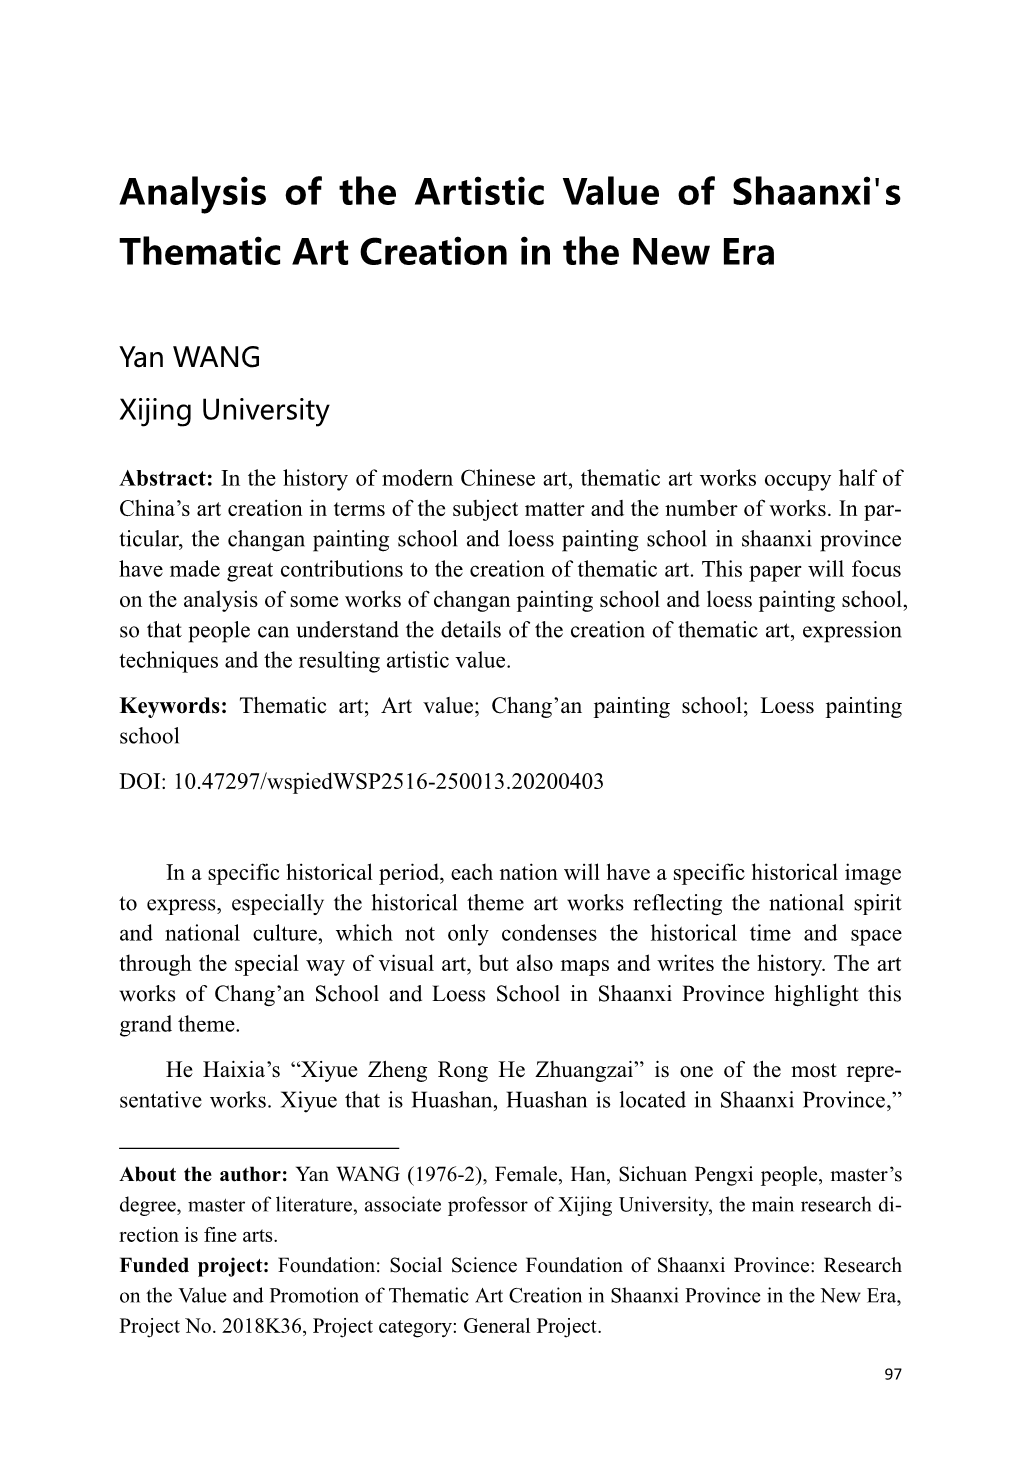 Analysis of the Artistic Value of Shaanxi's Thematic Art Creation in the New Era